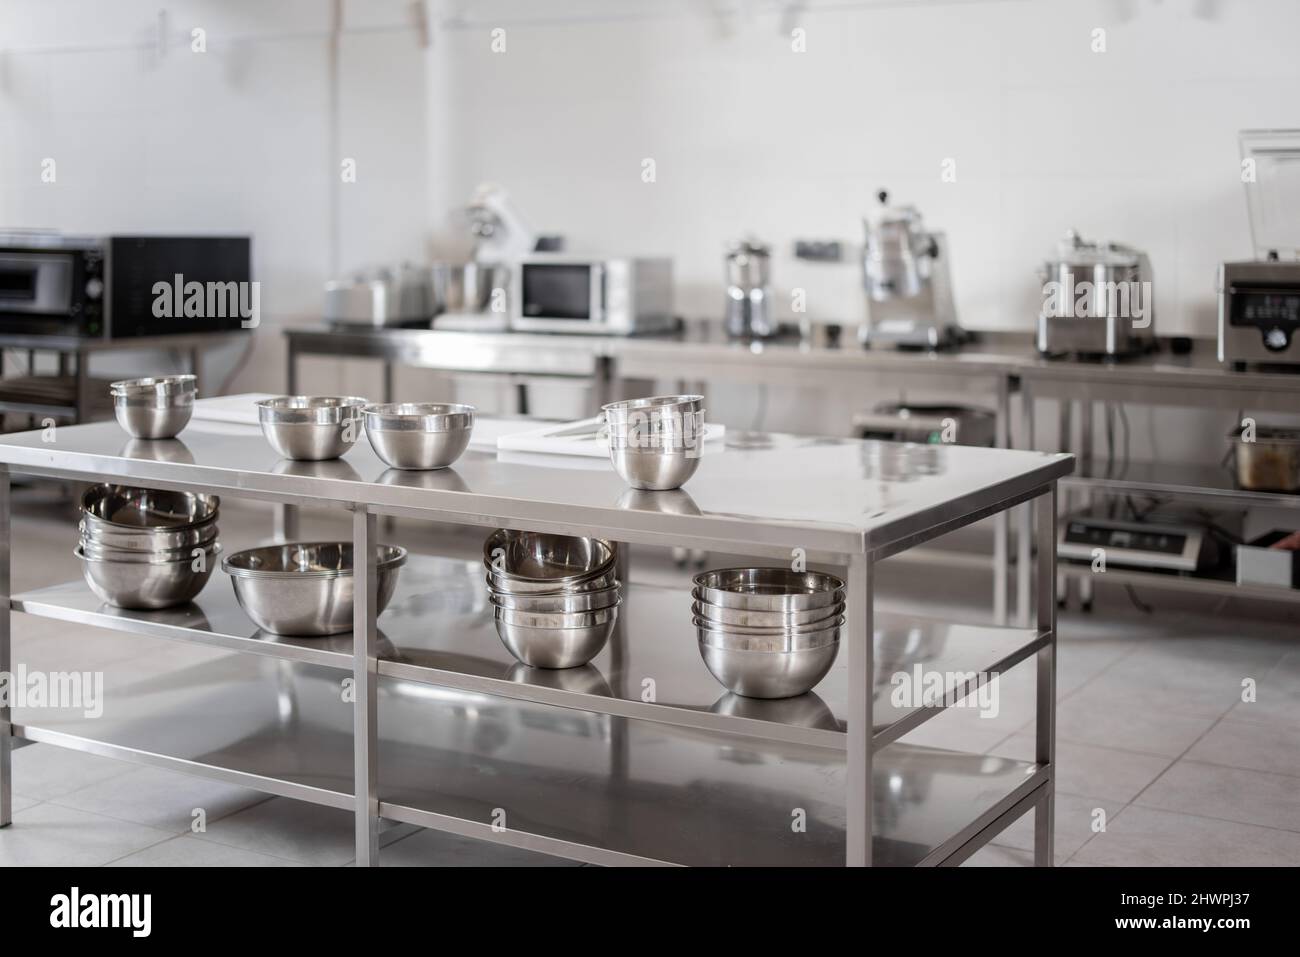 Professional restaurant kitchen with kitchen equipment and stainless steel tables. Interior with no people Stock Photo